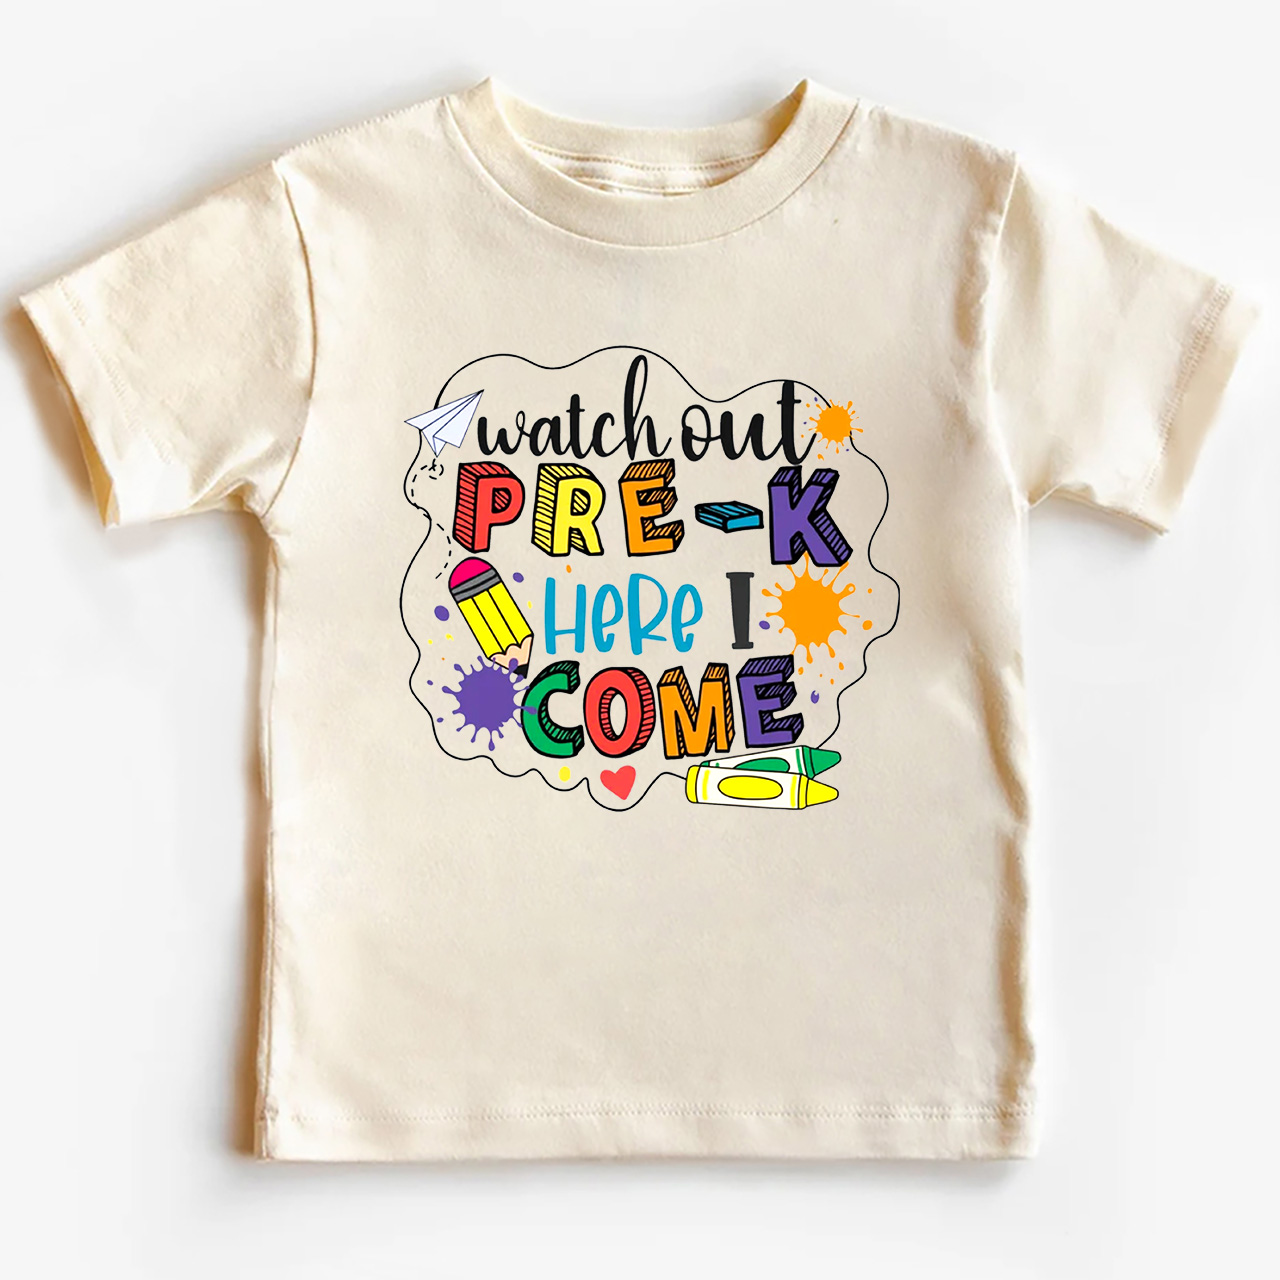 Pre K Shirt For Kids - Watch Out Pre K Here